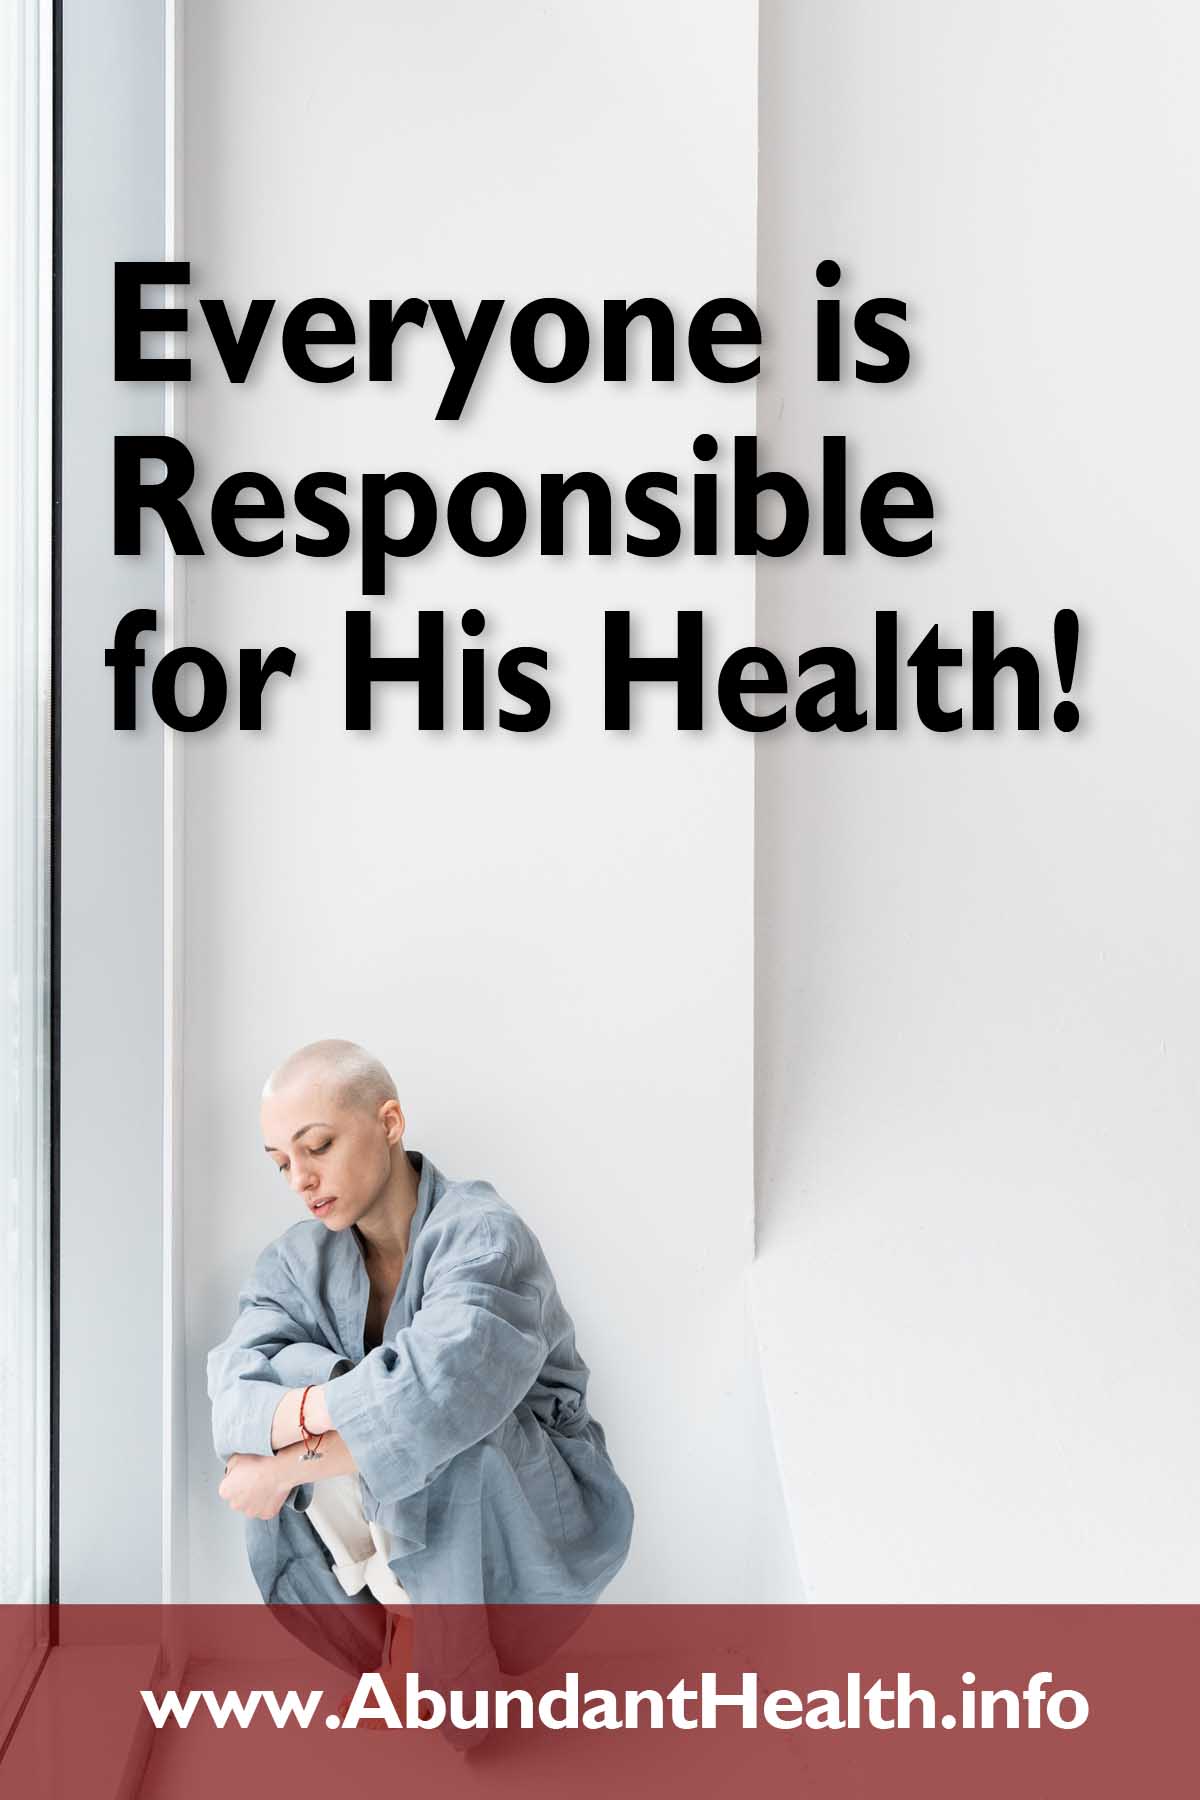 Everyone is Responsible for His Health!